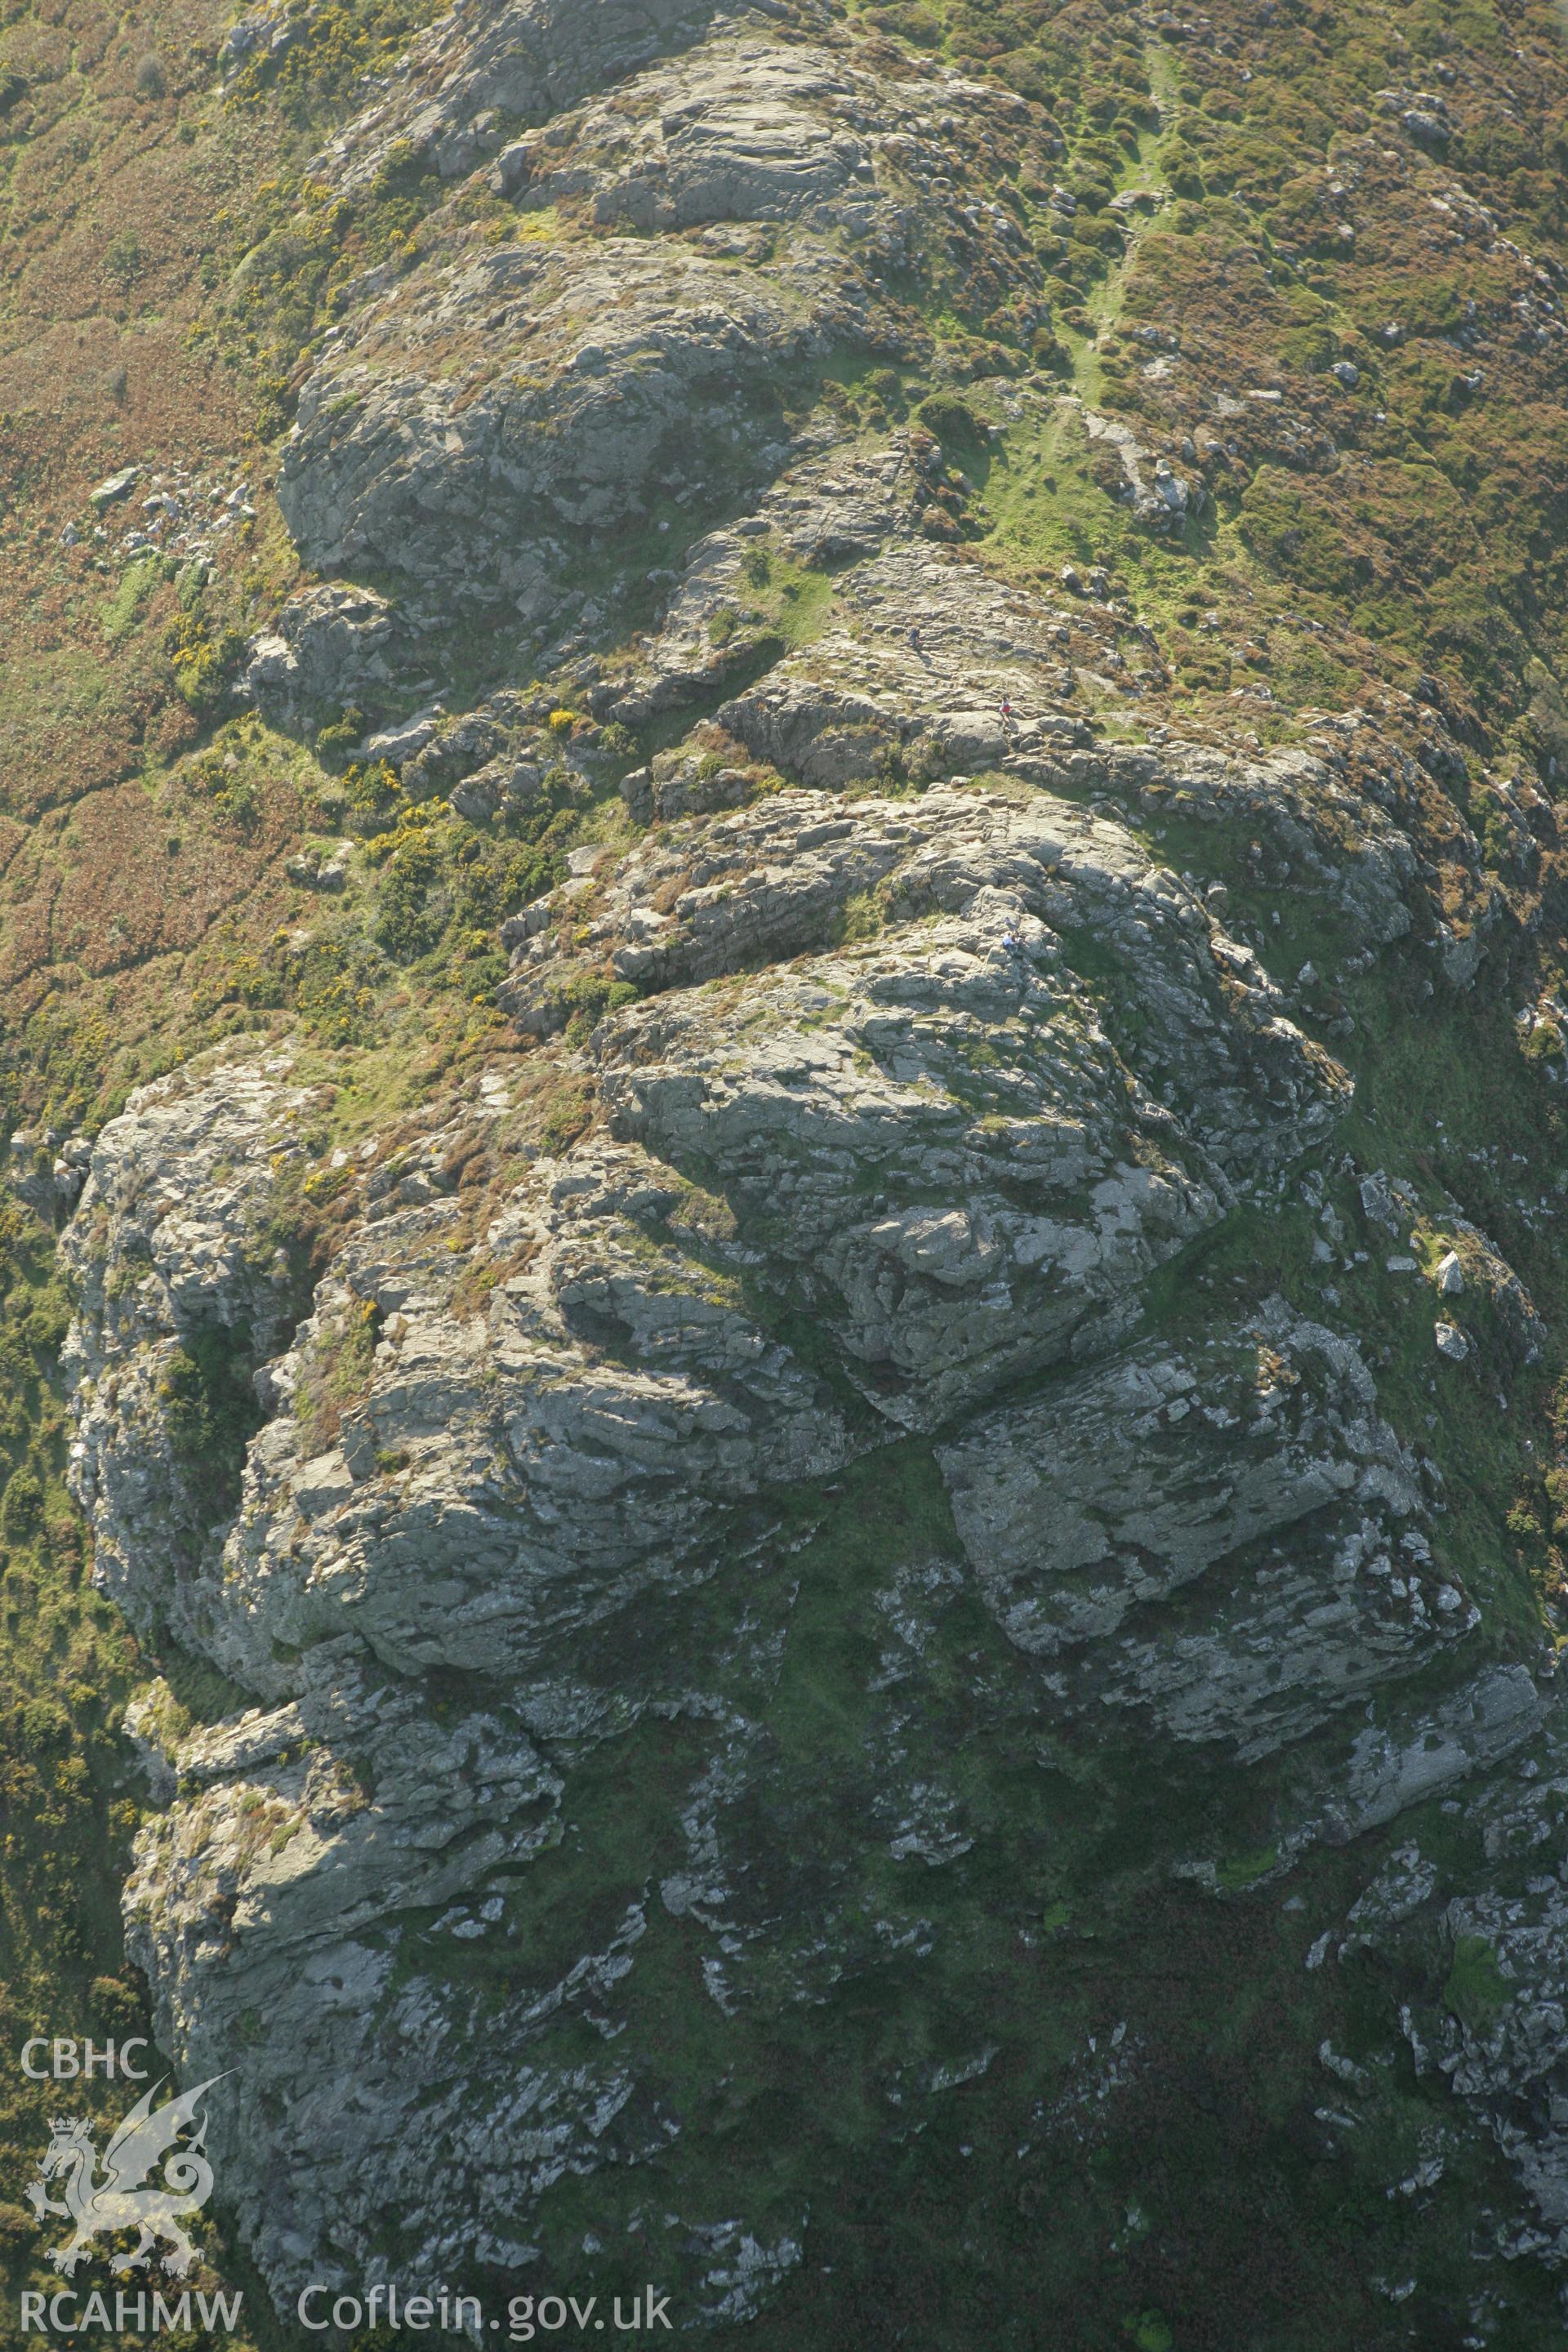 RCAHMW colour oblique photograph of Carn Llidi burial chambers. Taken by Toby Driver on 23/10/2007.